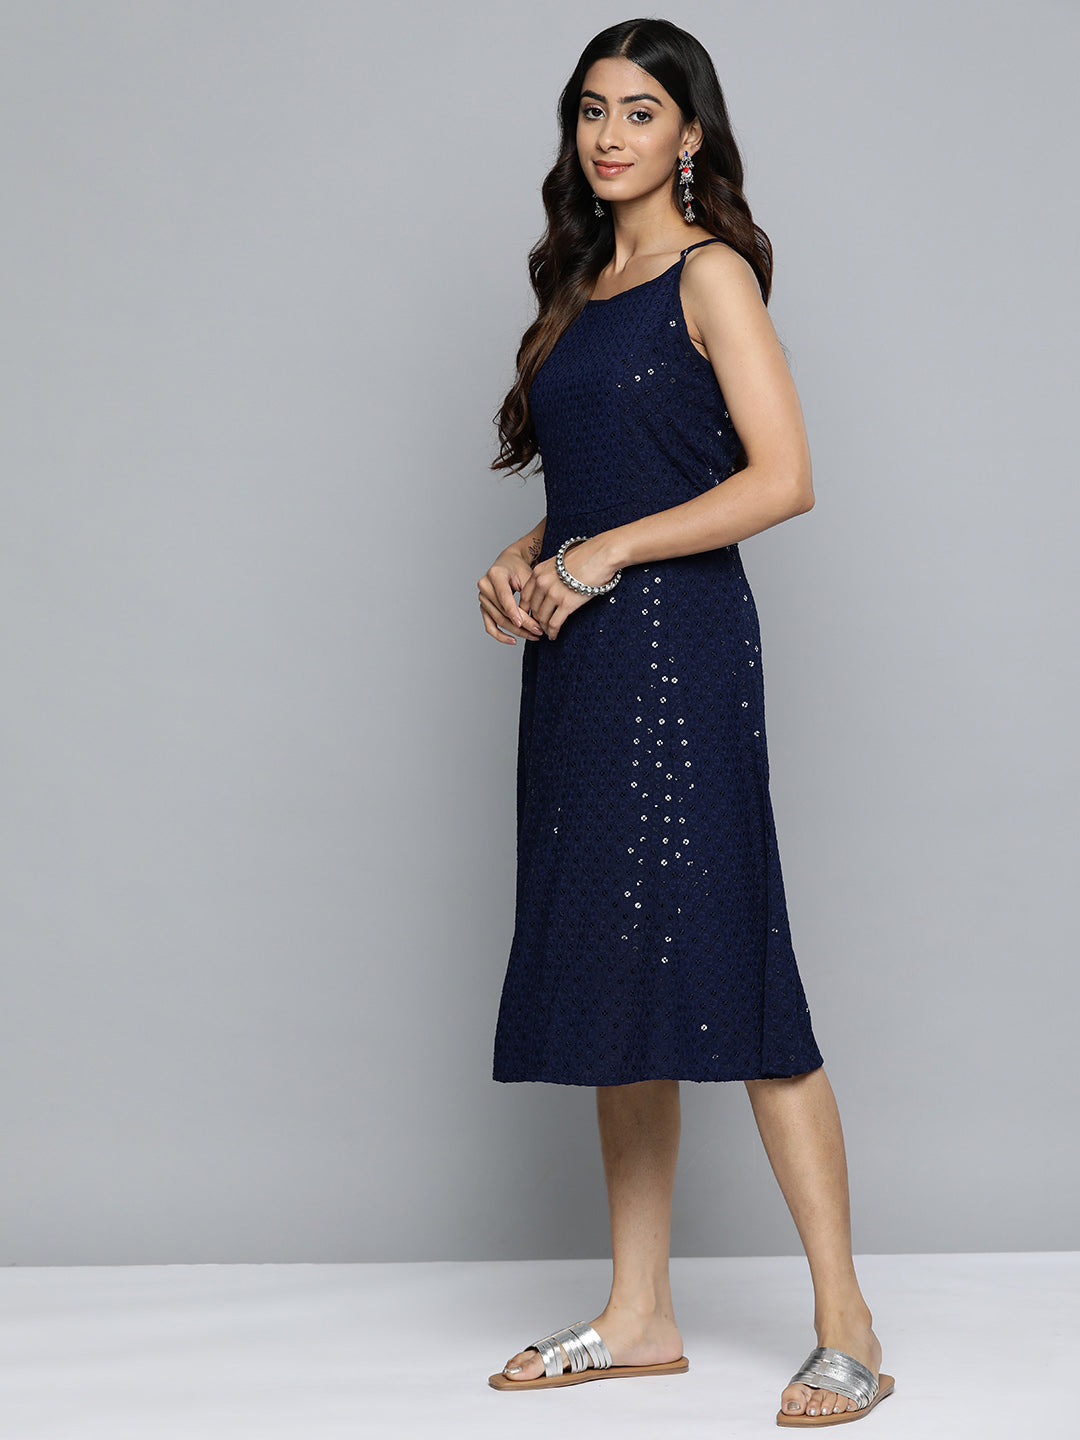 Jompers Navy Floral Sequin Embroidered A-Line Midi Dress ( JOK 1494 Navy )